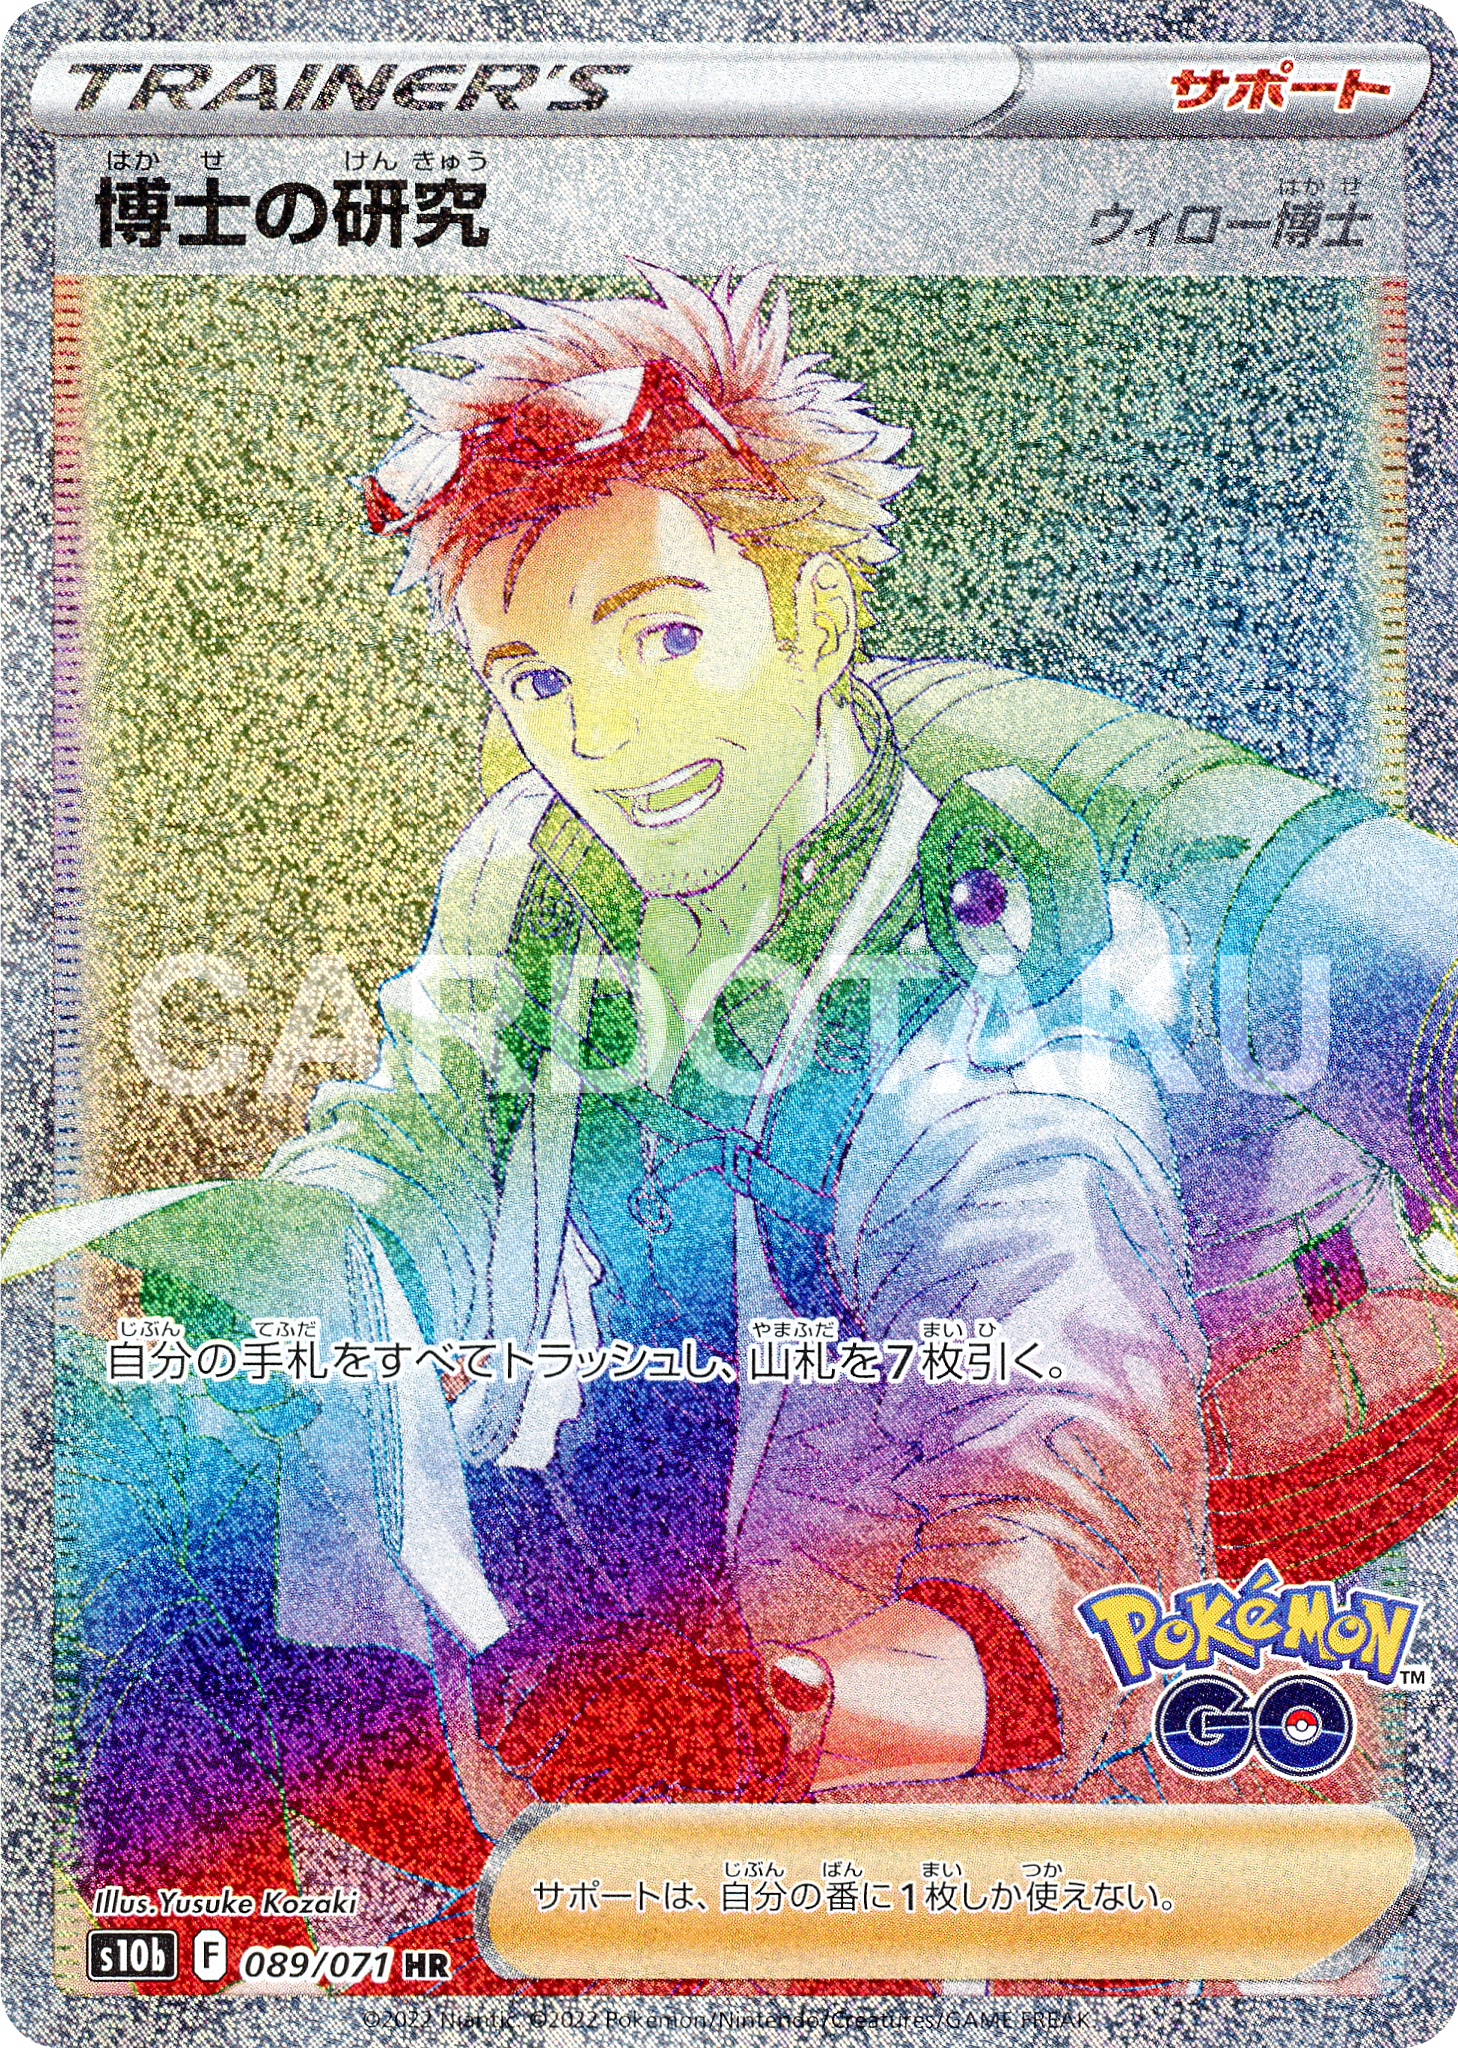 POKÉMON CARD GAME Sword & Shield Expansion pack ｢POKÉMON GO｣  POKÉMON CARD GAME s10b 089/071 Hyper Rare card  Doctor's research Dr. Willow